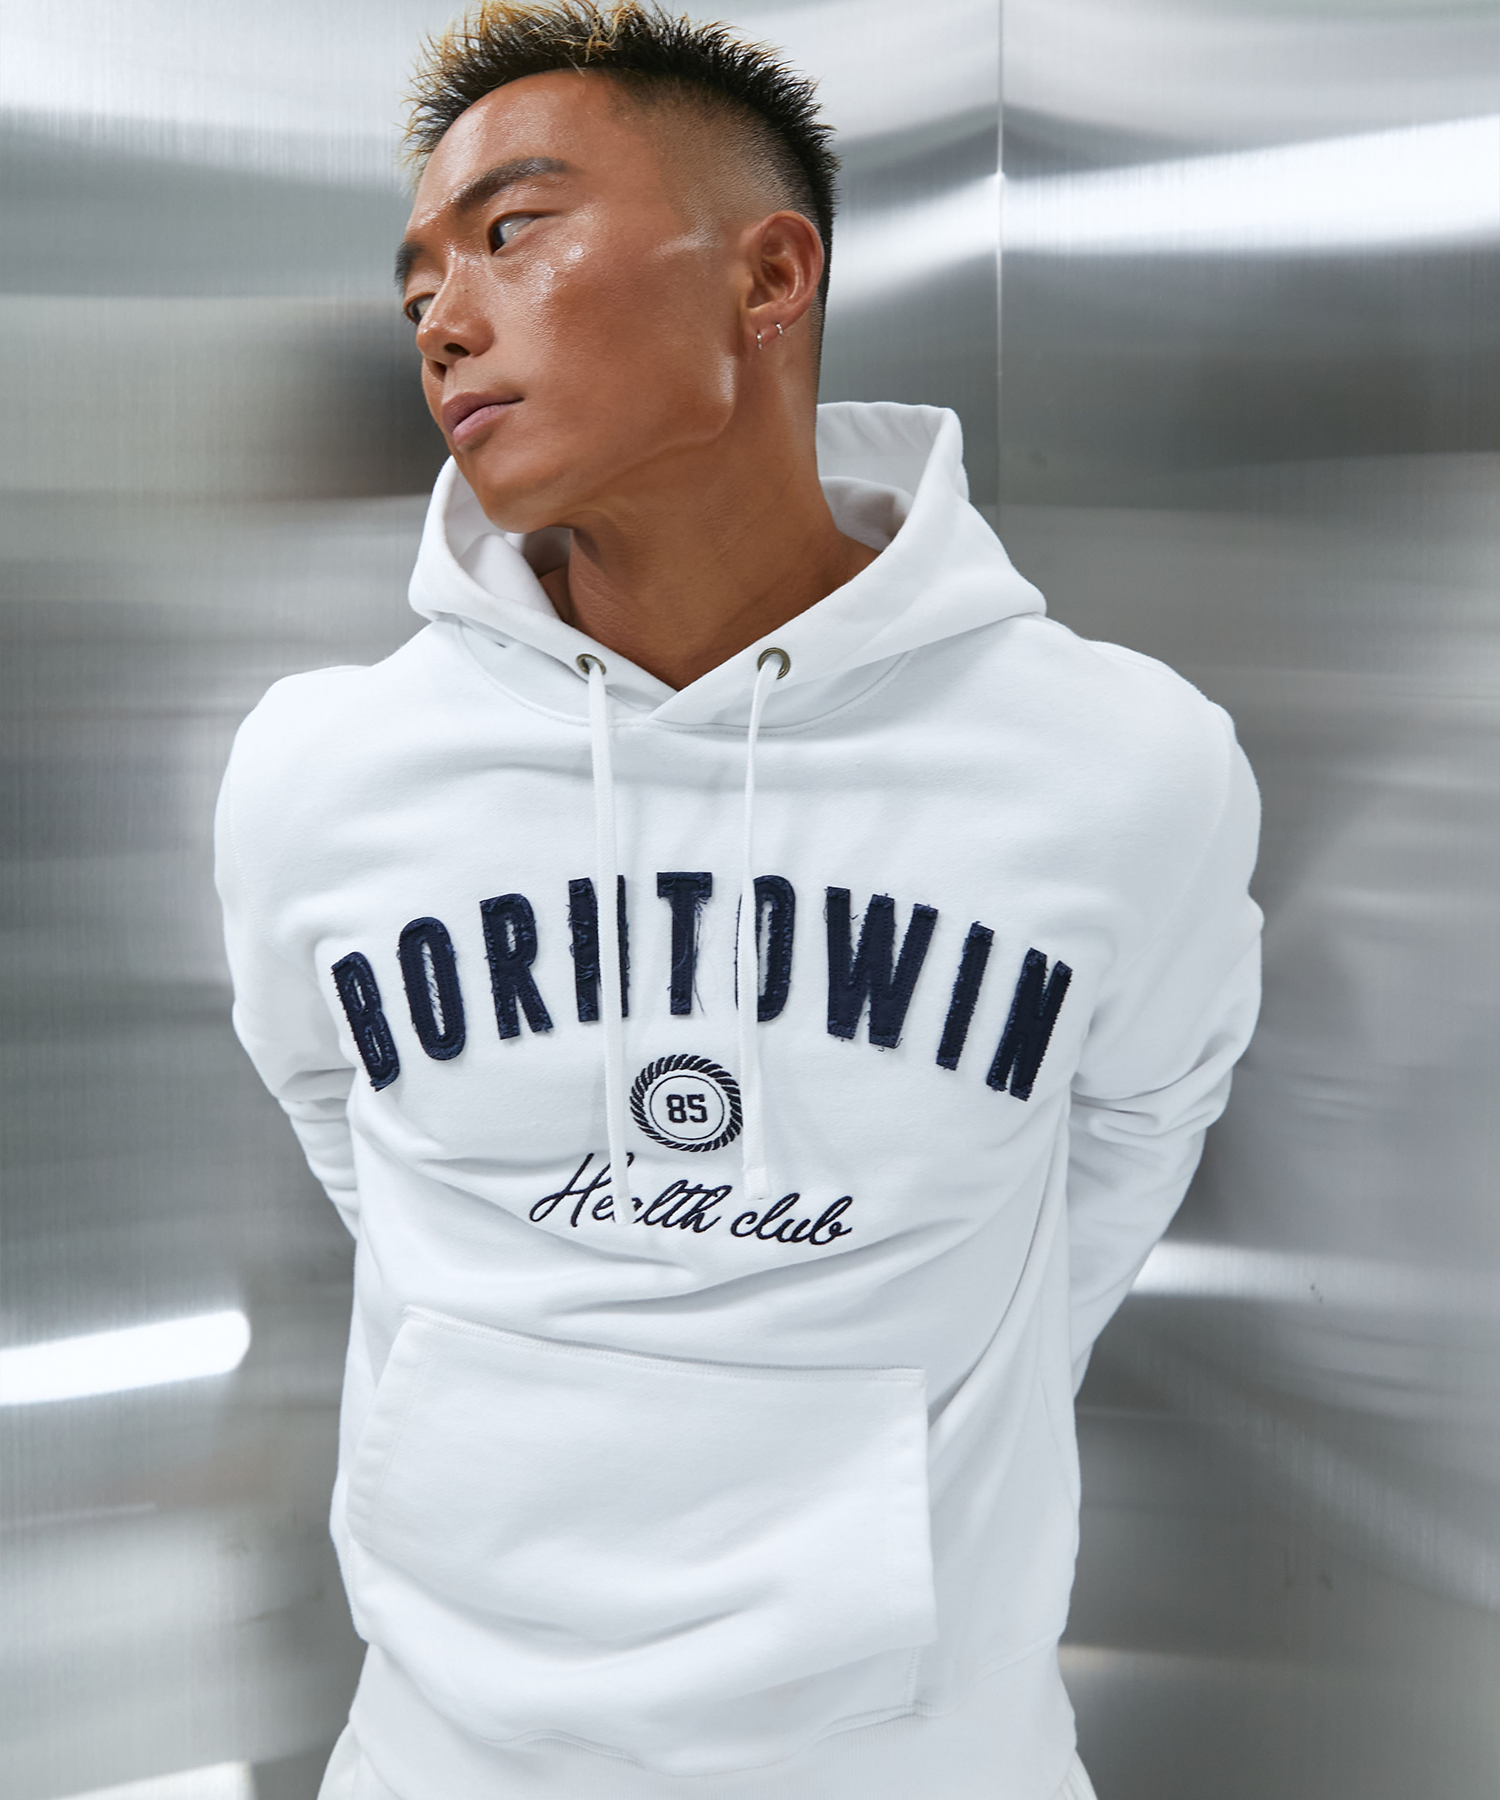 BORNTOWIN PATCH MUSCLE FIT HOODIE [WHITE]